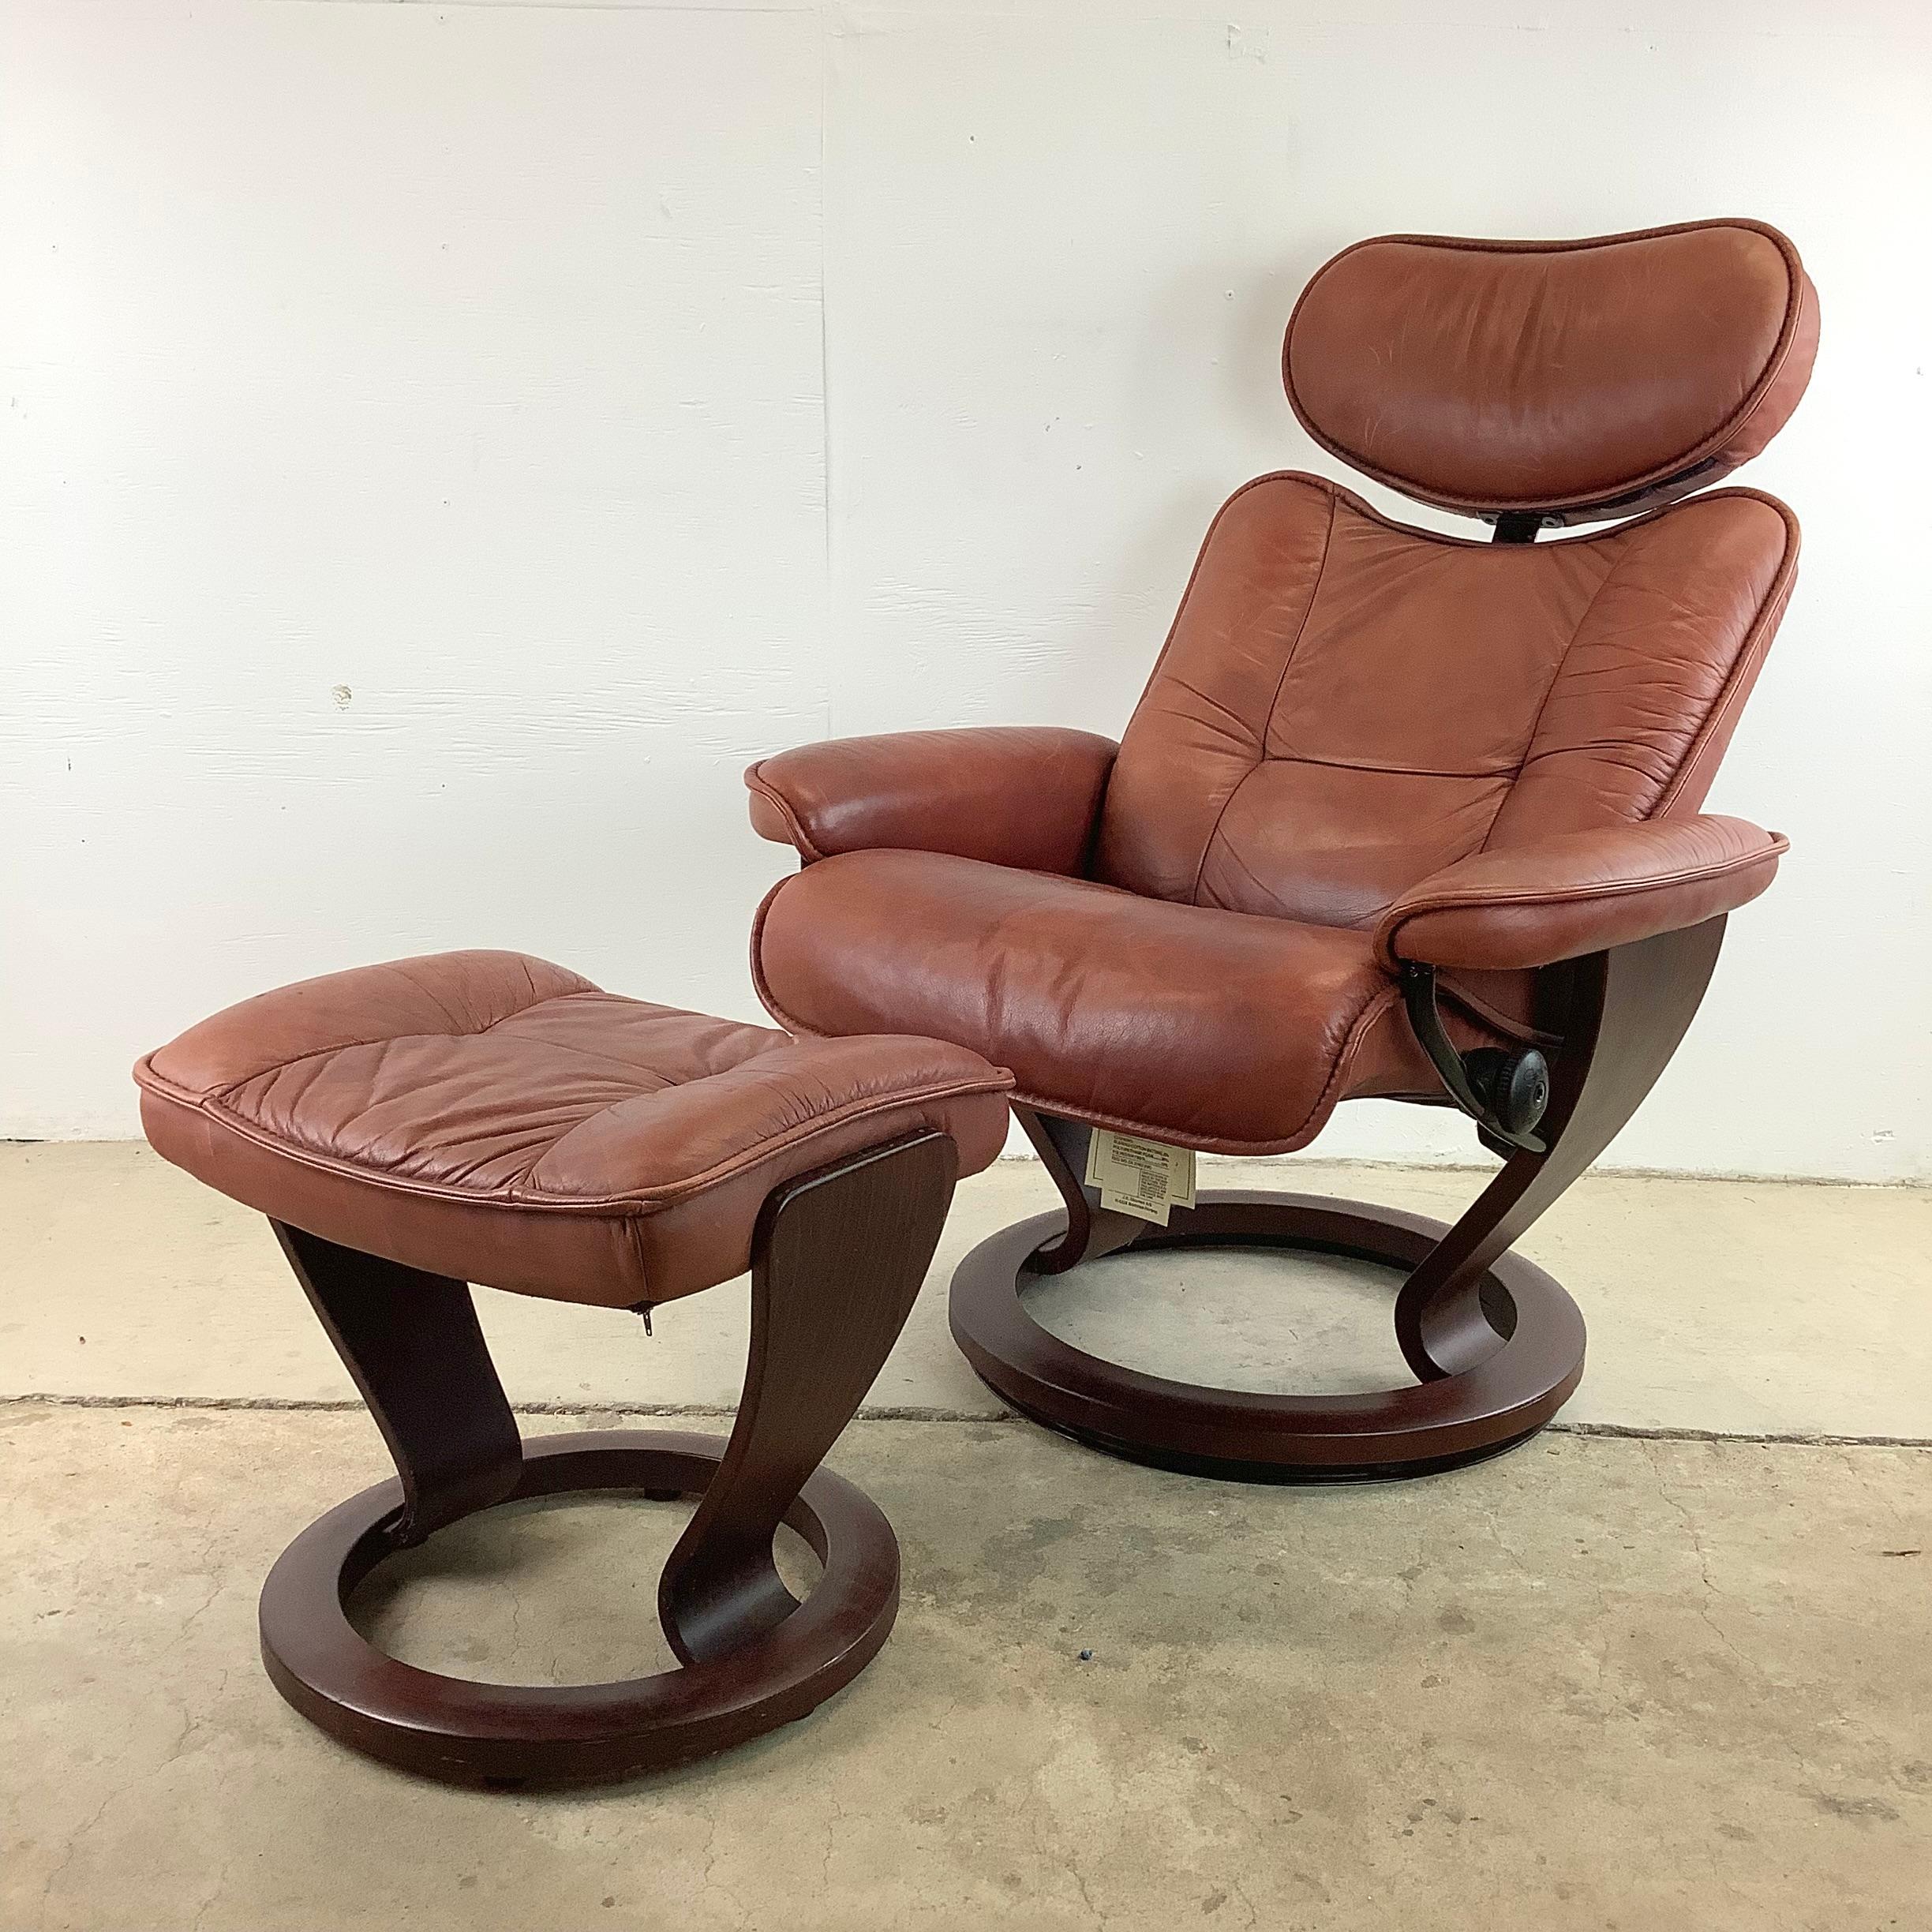 Indulge in the ultimate relaxation experience with this Ekornes Stressless Admiral Recliner Swivel Lounge Chair with Ottoman. This exquisite recliner and ottoman set combines timeless design, luxurious comfort, and exceptional craftsmanship in